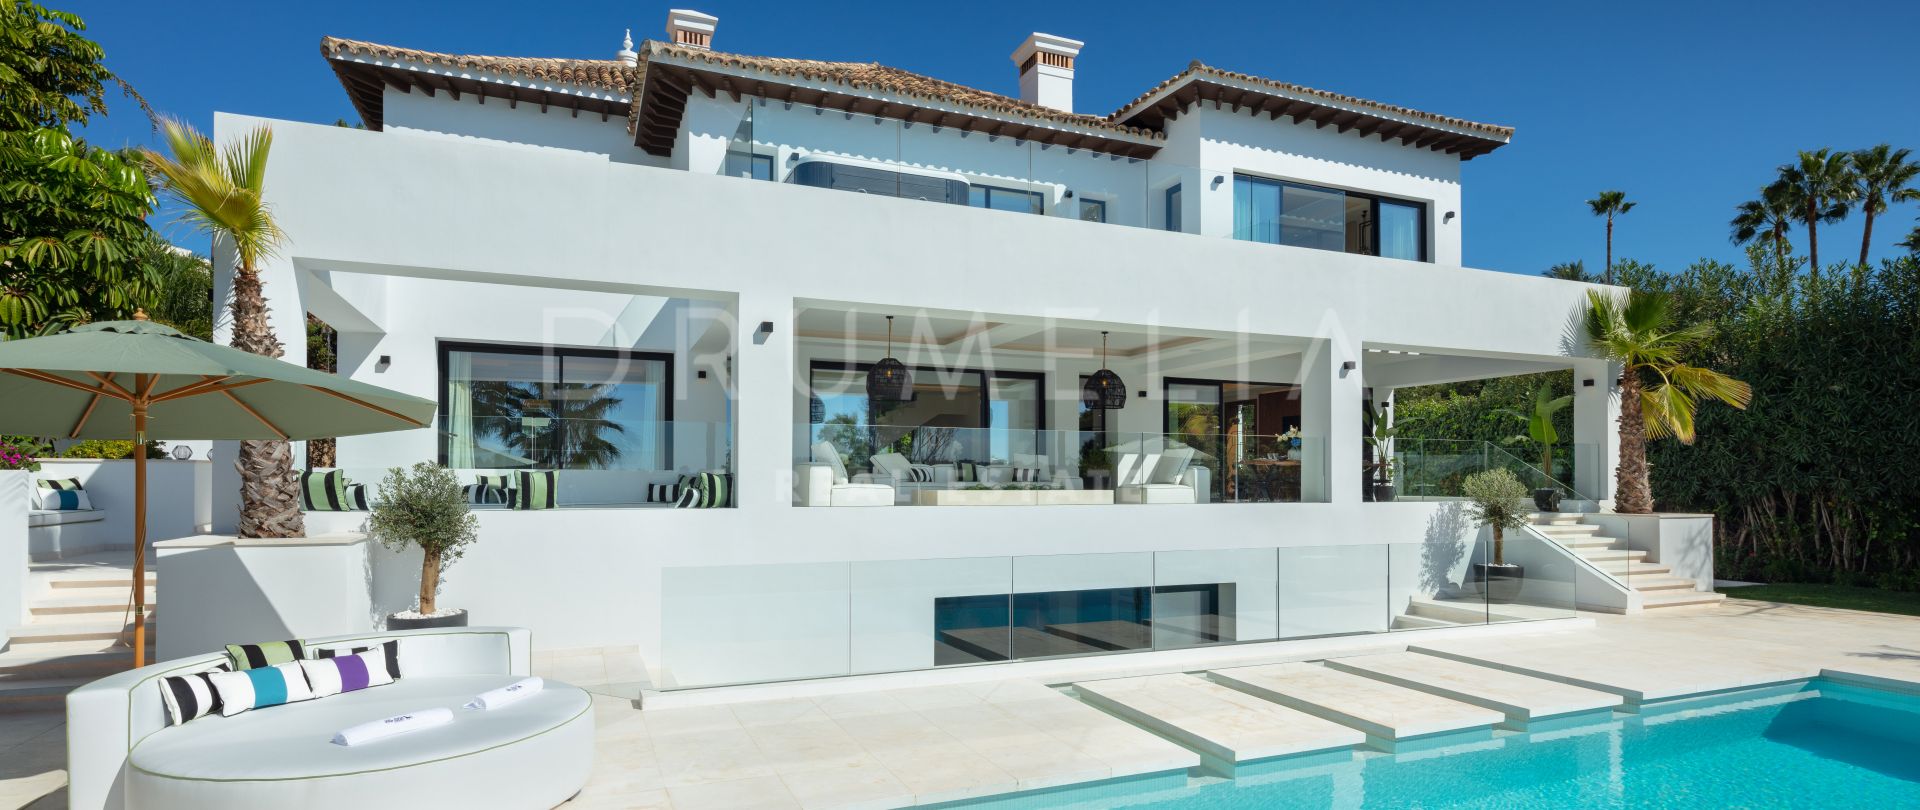 Villa 1000 - Sophisticated Modern Luxury Golf Front Villa with Worldly Feel, Nueva Andalucía